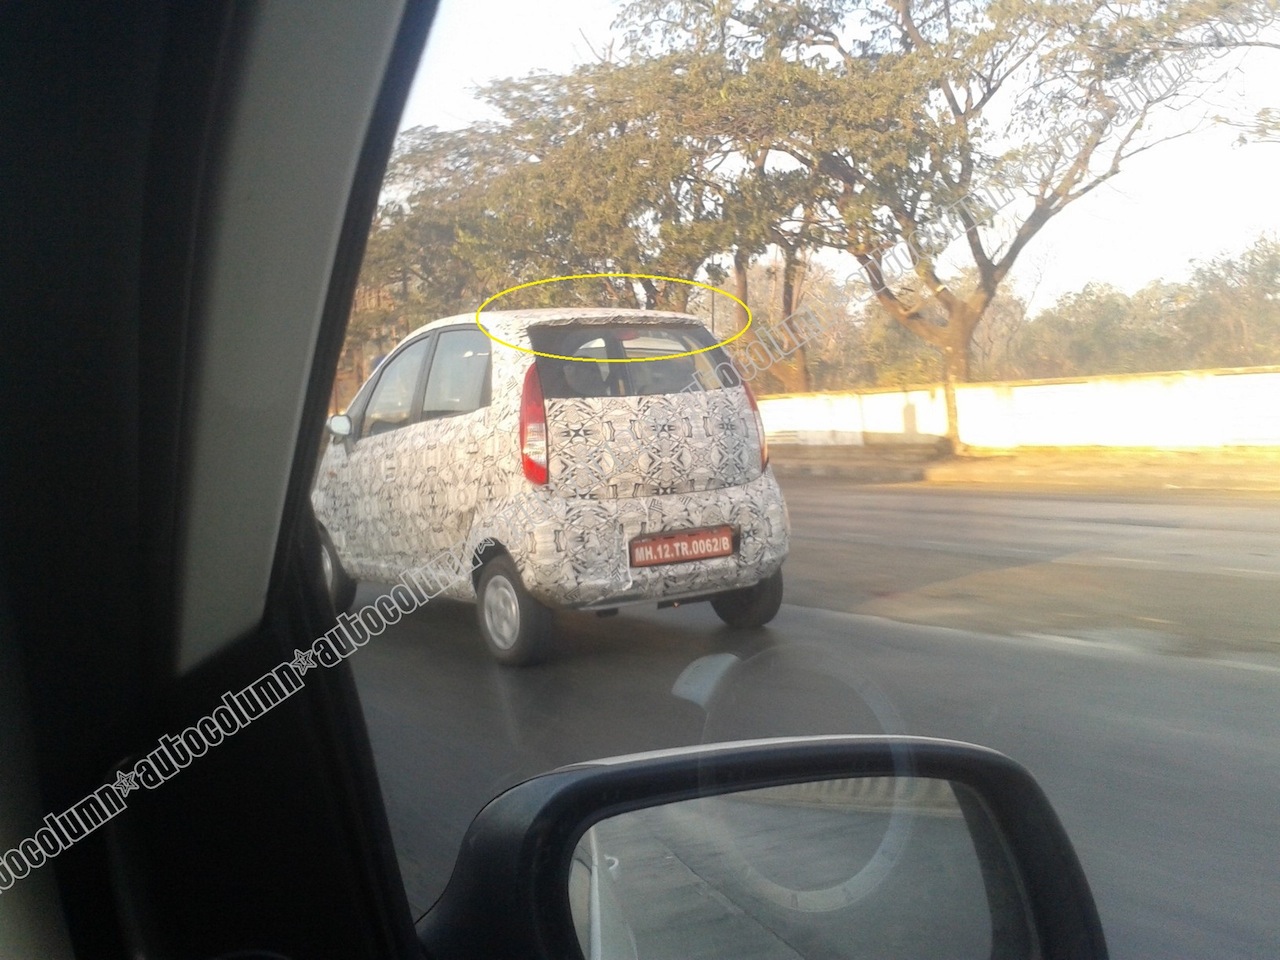 Exclusive Scoop: TATA Nano Diesel Caught Testing – Clear Front & Rear  Pictures 